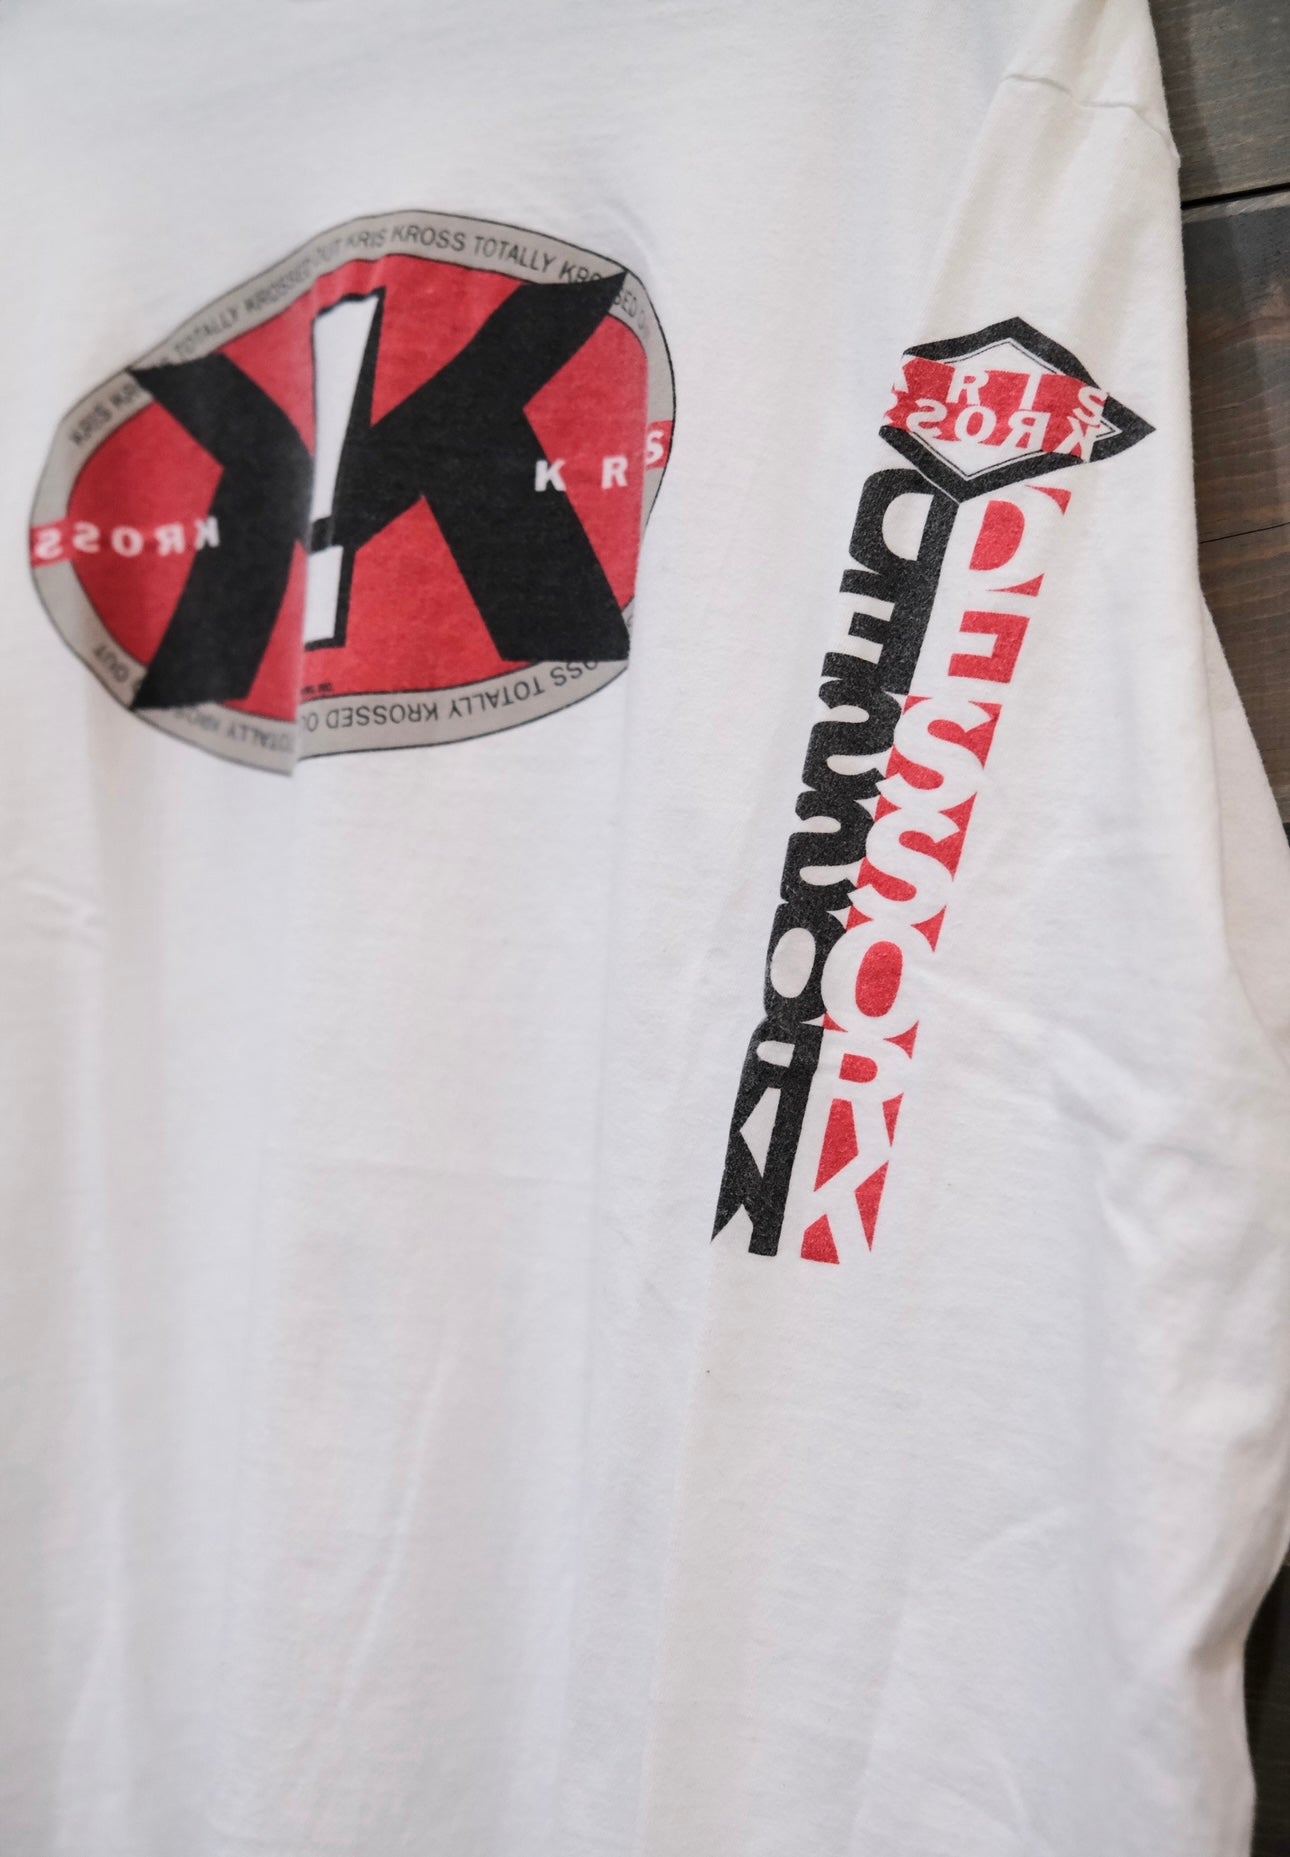 Kris Kross Promo T-shirt (Totally Crossed Out)